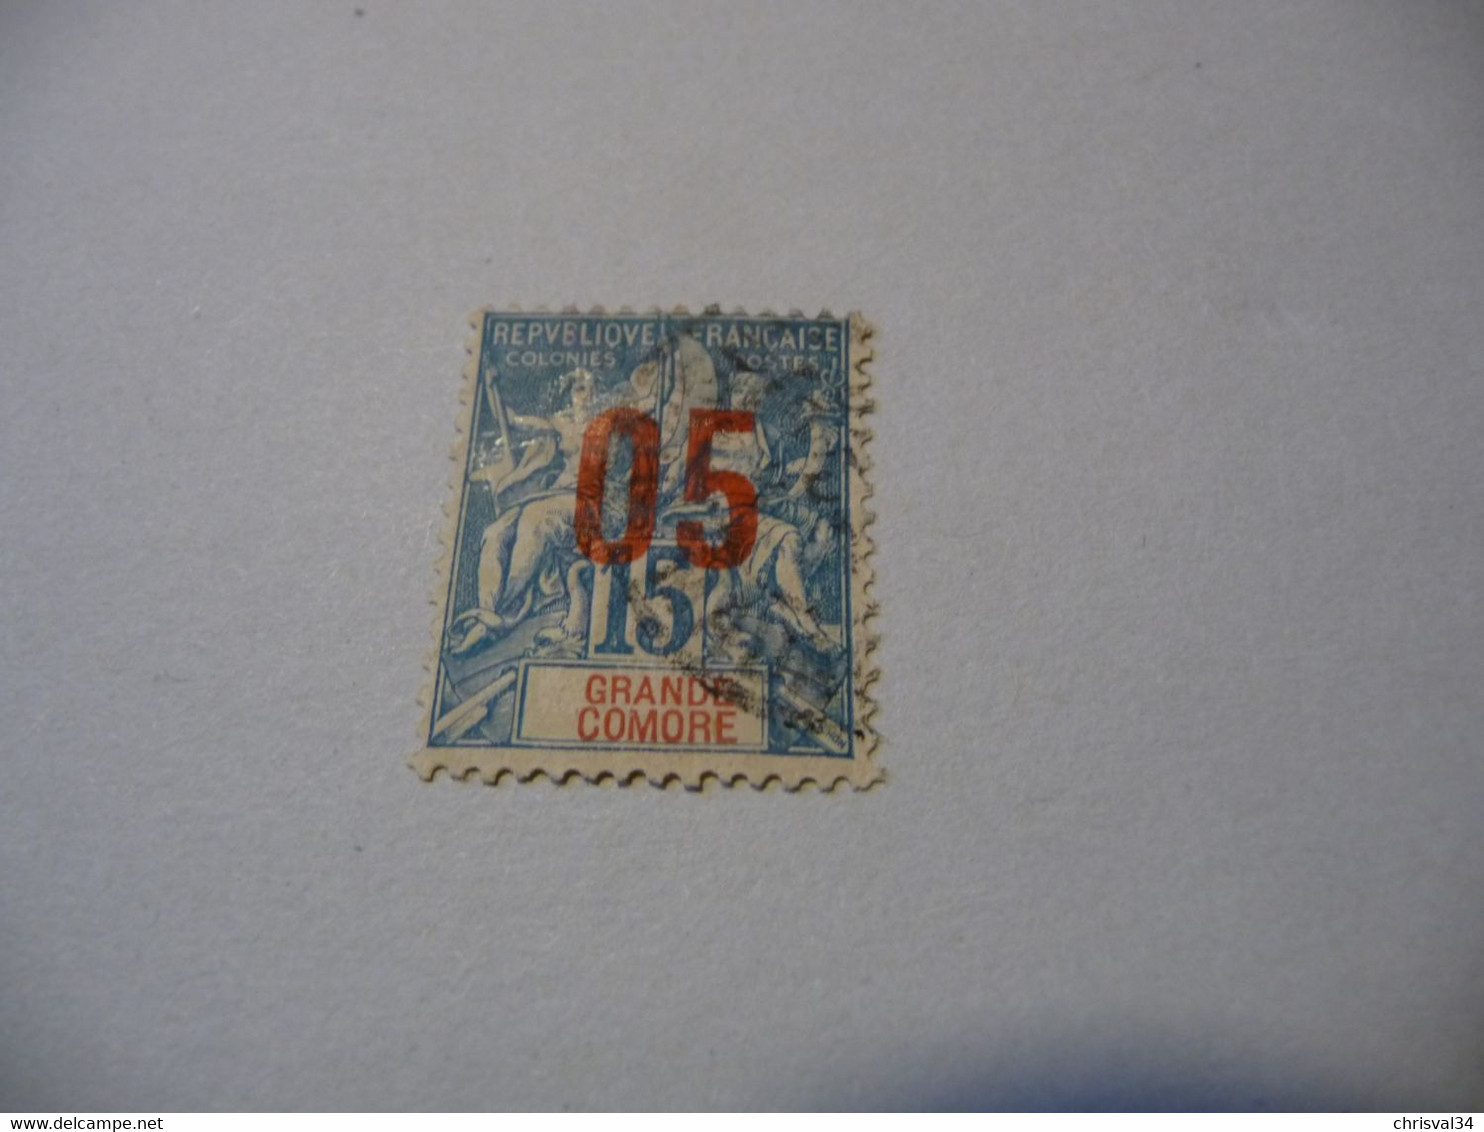 TIMBRE   GRANDE  COMORE  N   22     COTE  2,00  EUROS  OBLITERE - Used Stamps